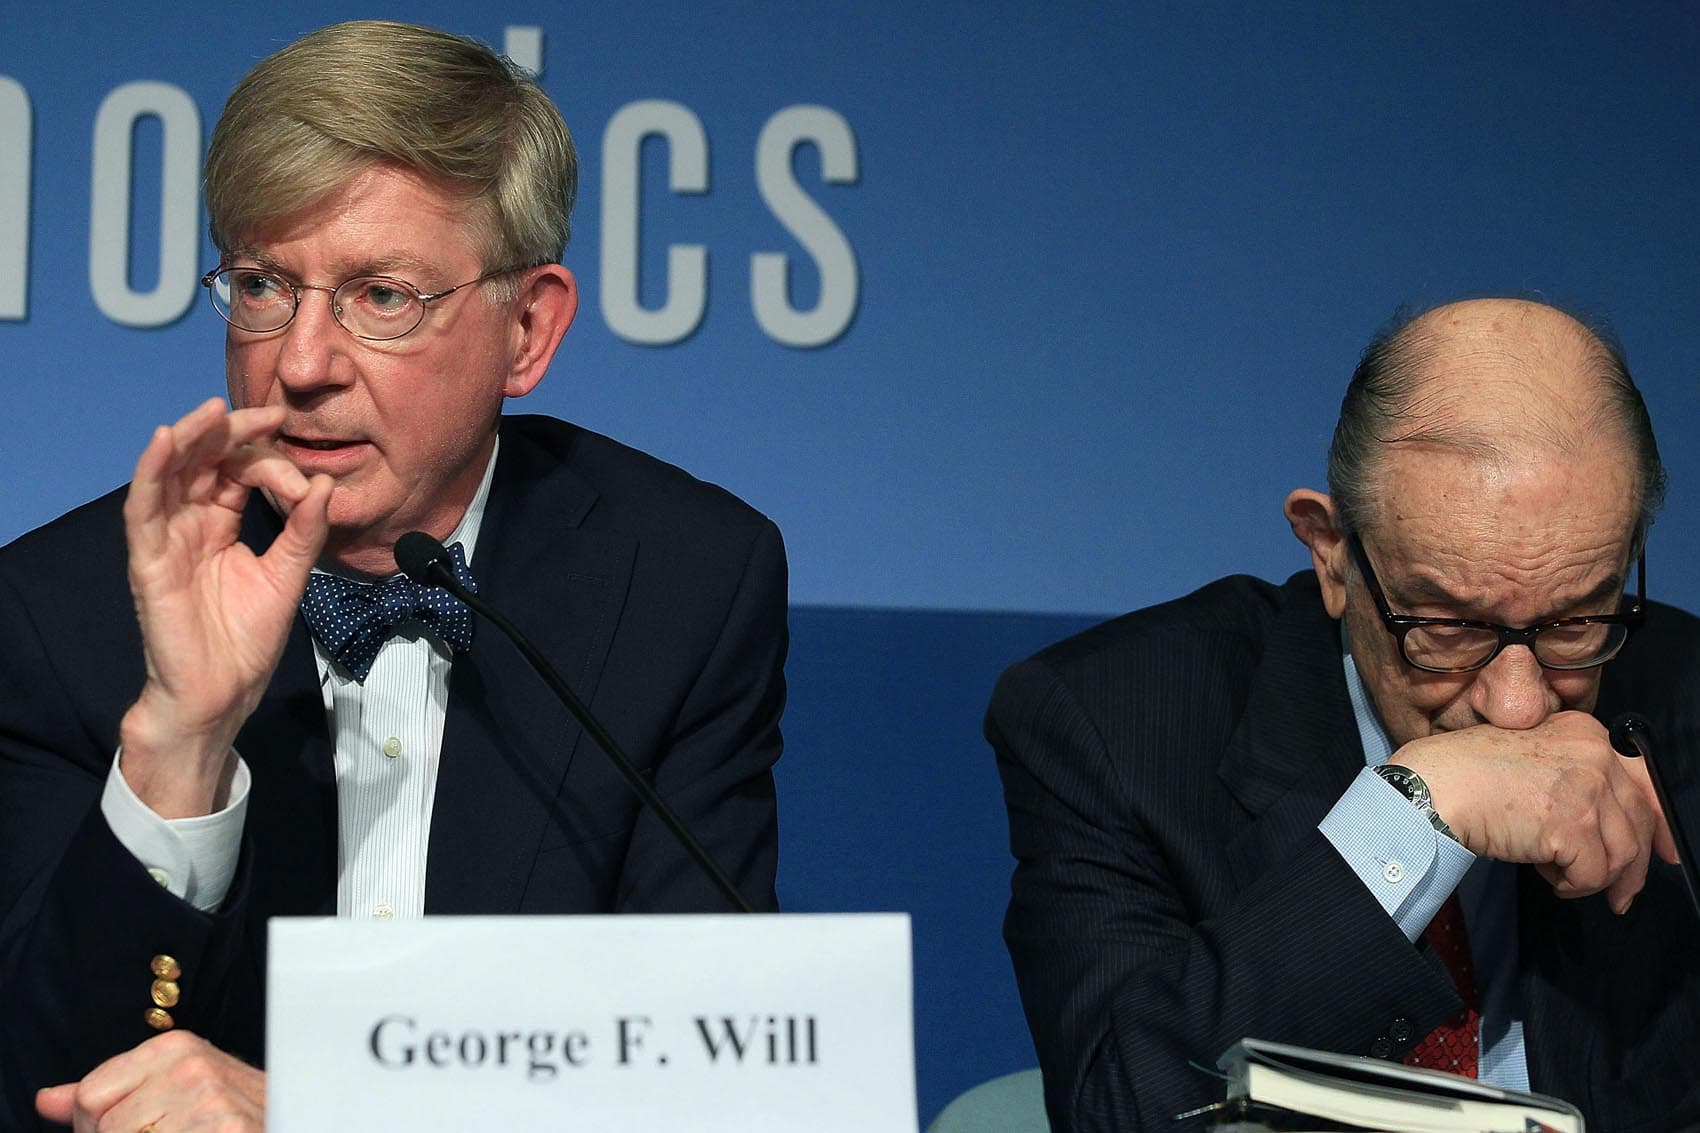 Former Federal Reserve Chairman Alan Greenspan (right) and columnist George Will participate in a discussion about the late U.S. Senator Daniel Patrick Moynihan, at the Peterson Institute for International Economics on Oct. 27, 2010. (Mark Wilson/Getty Images)